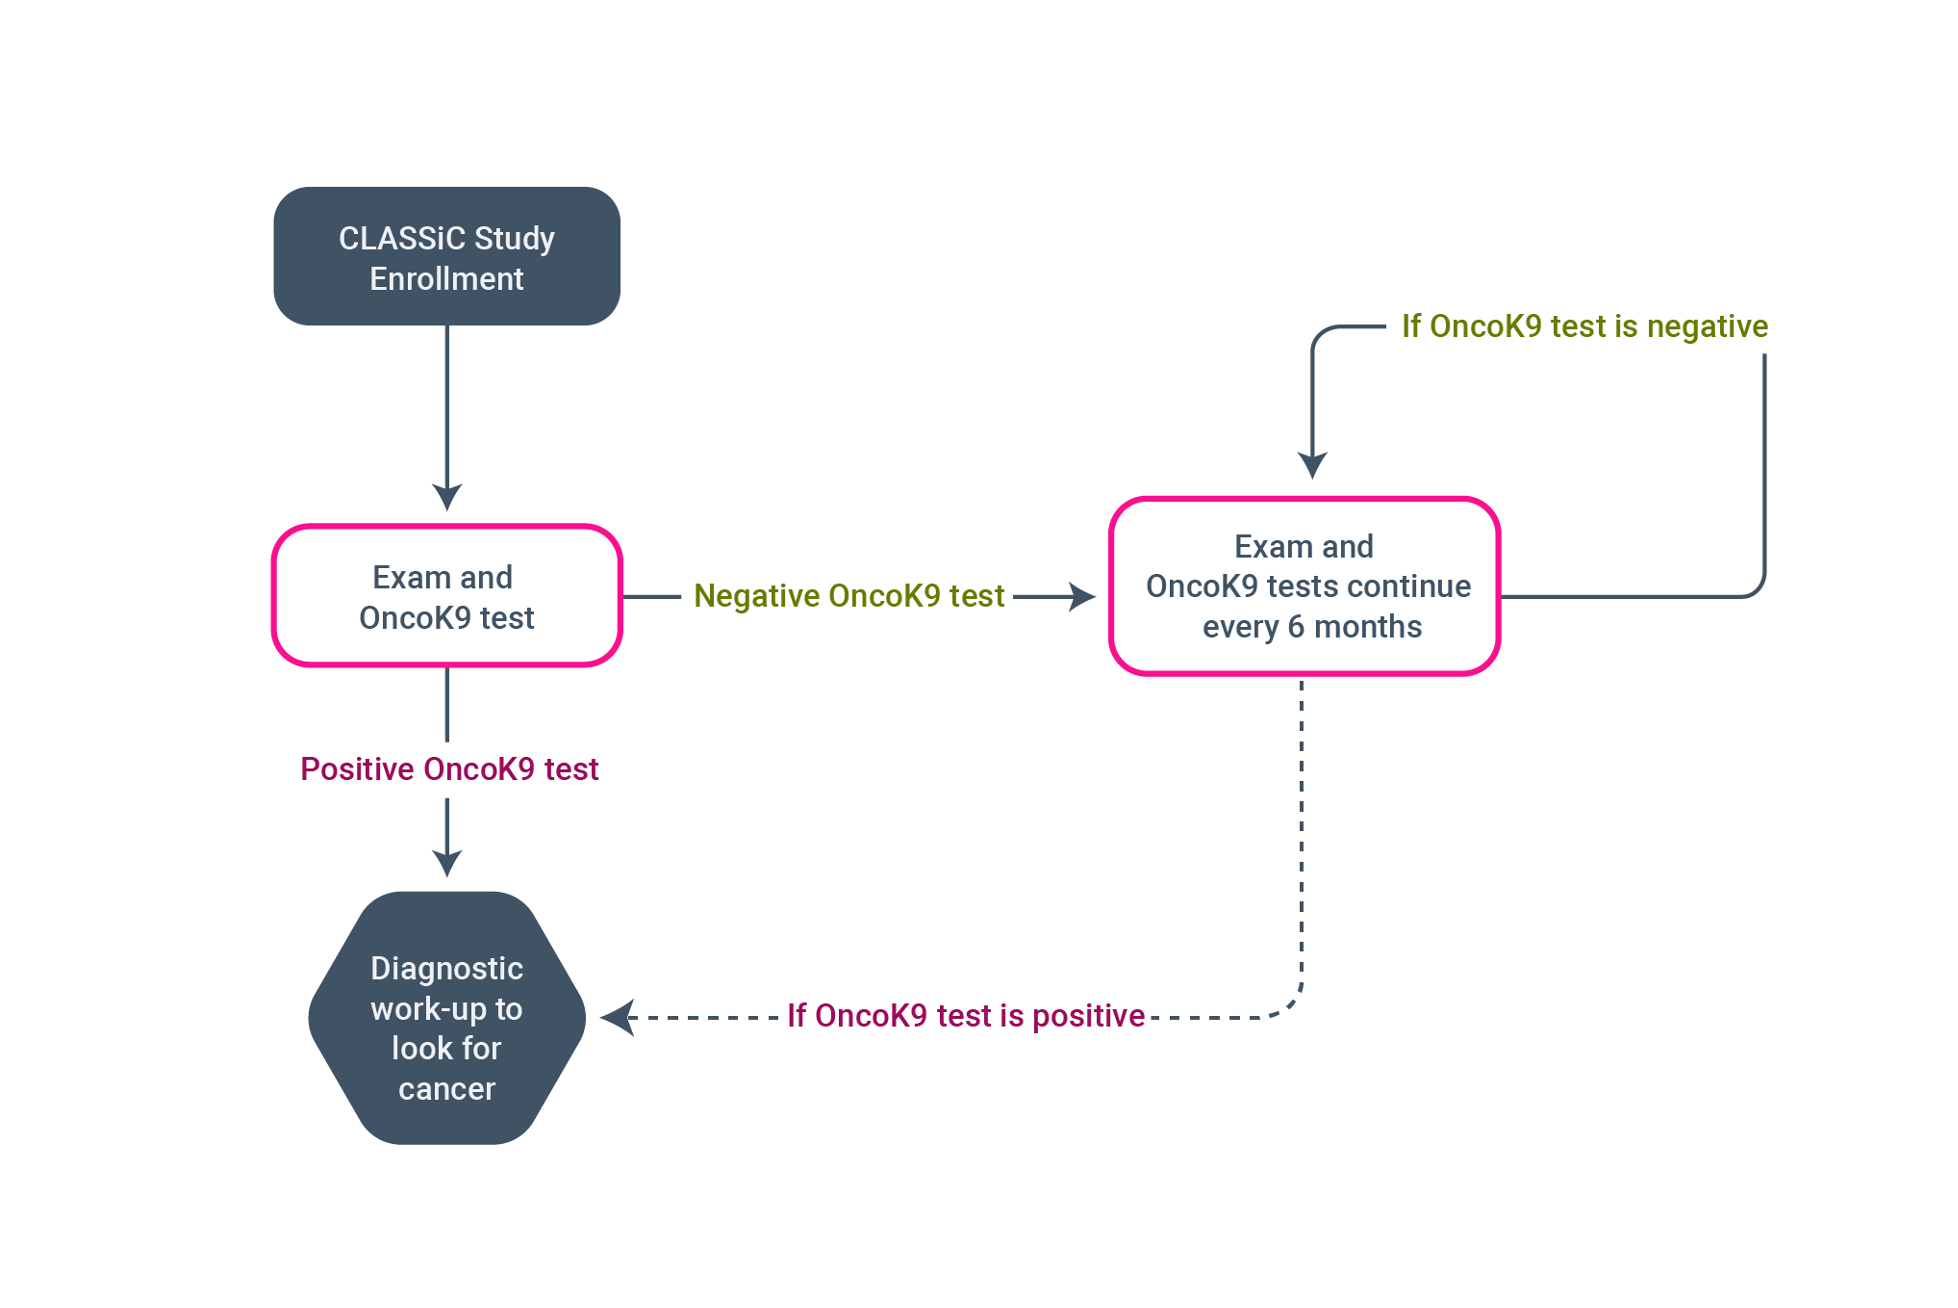 Figure 2. A Flow Chart Outlining the CLASSiC STUDY

Patients are enrolled into the trial by their primary care doctor. Once enrolled, an exam and OncoK9 test is performed every 6 months. If the test is negative, the patient will return in 6 months for the next assessment. If the test is positive, the patient is referred to a BluePearl Oncology clinic for a diagnostic workup to attempt to identify the cancer. This is a funded collaborative effort between BluePearl, PetDx, and primary care doctors in the Greater Philadelphia area.